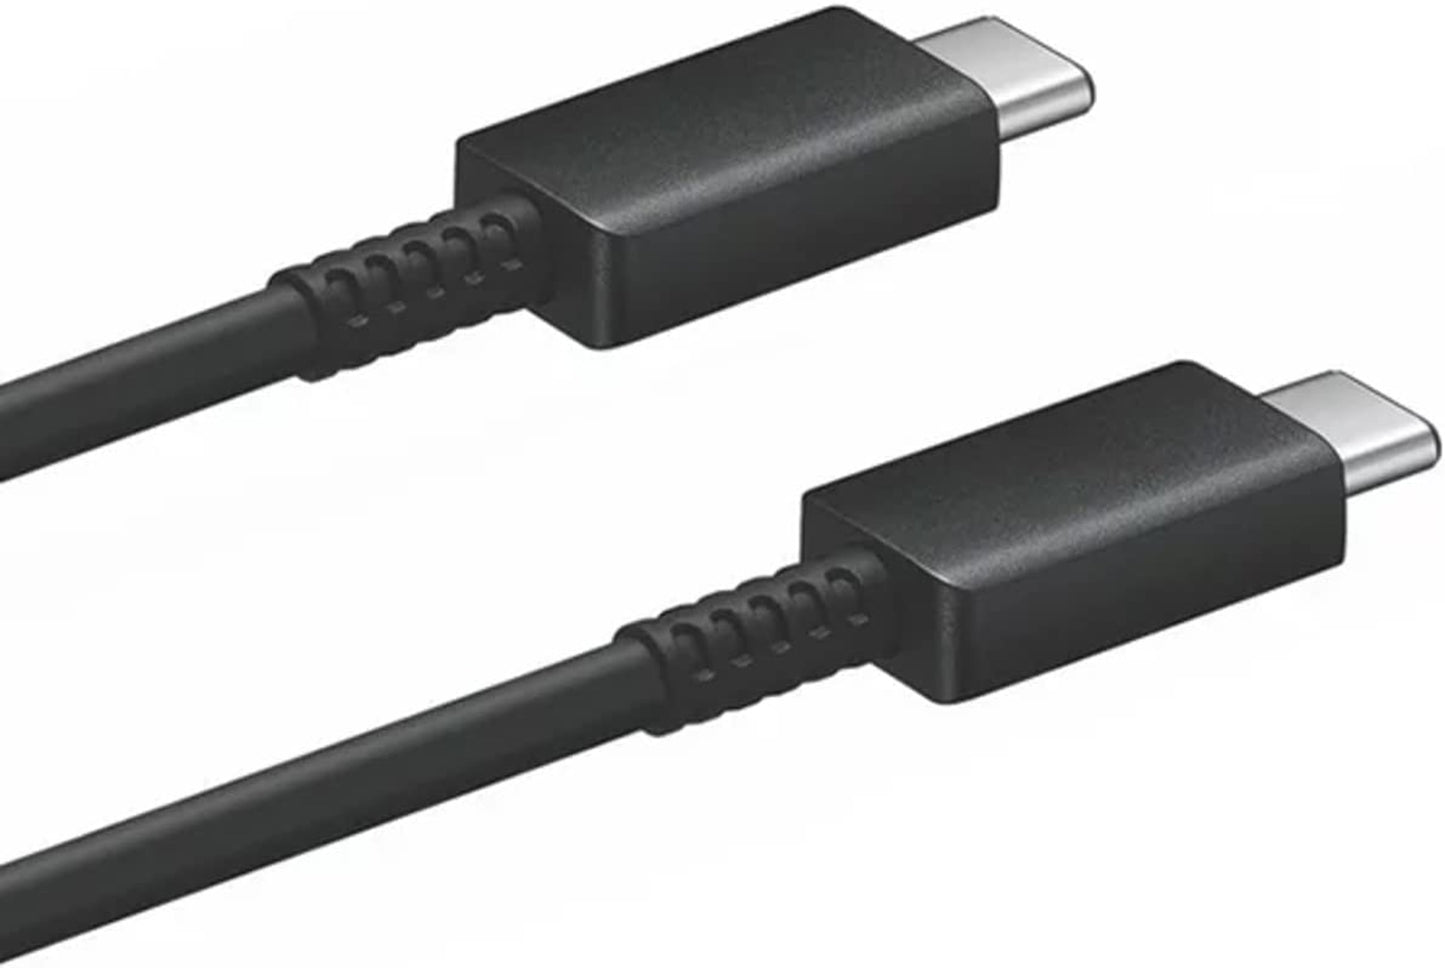 USB-C 25W PD Super Fast Charging Type-C Cable Compatible for Samsung & Other Devices